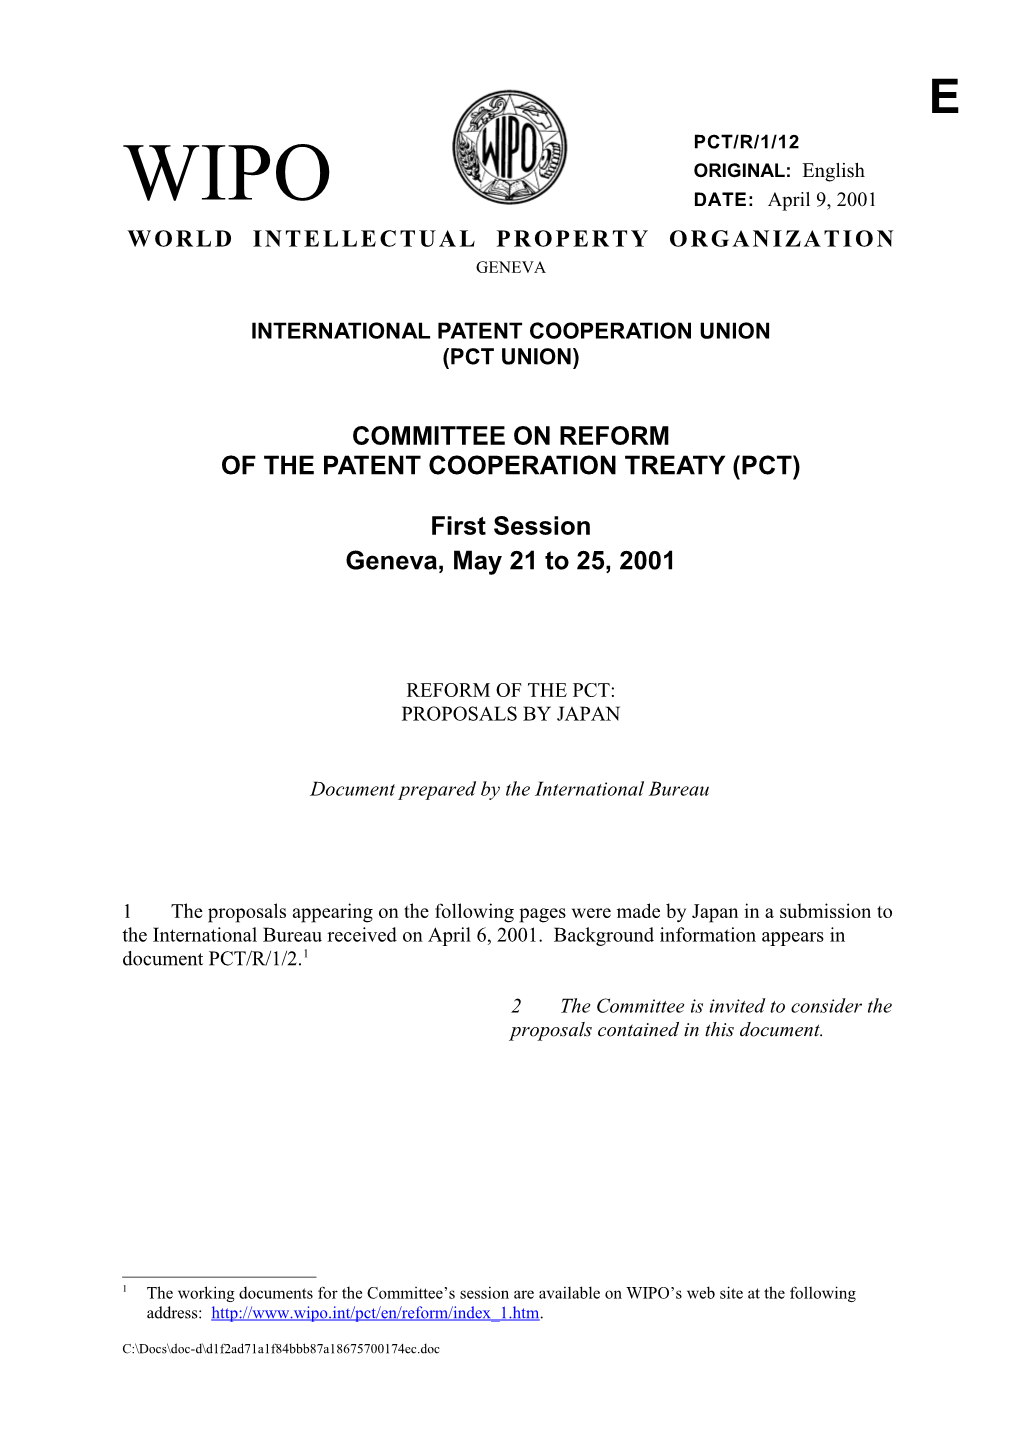 PCT/R/1/12: Reform of the PCT: Proposals by Japan